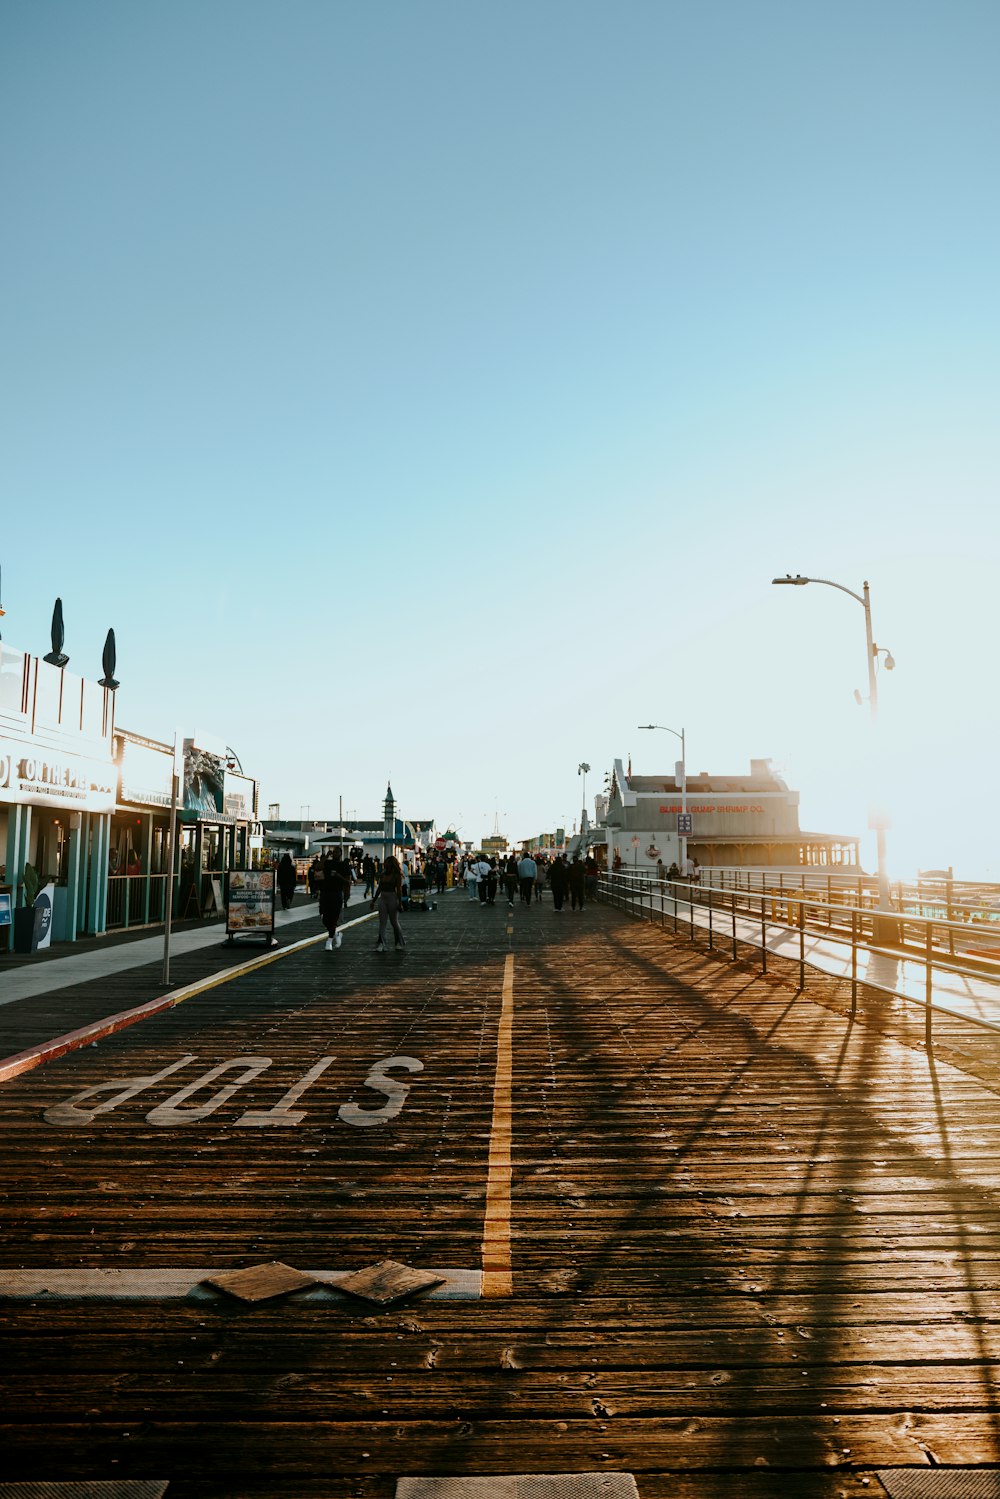 a group of people walking on a boardwalk next to the ocean